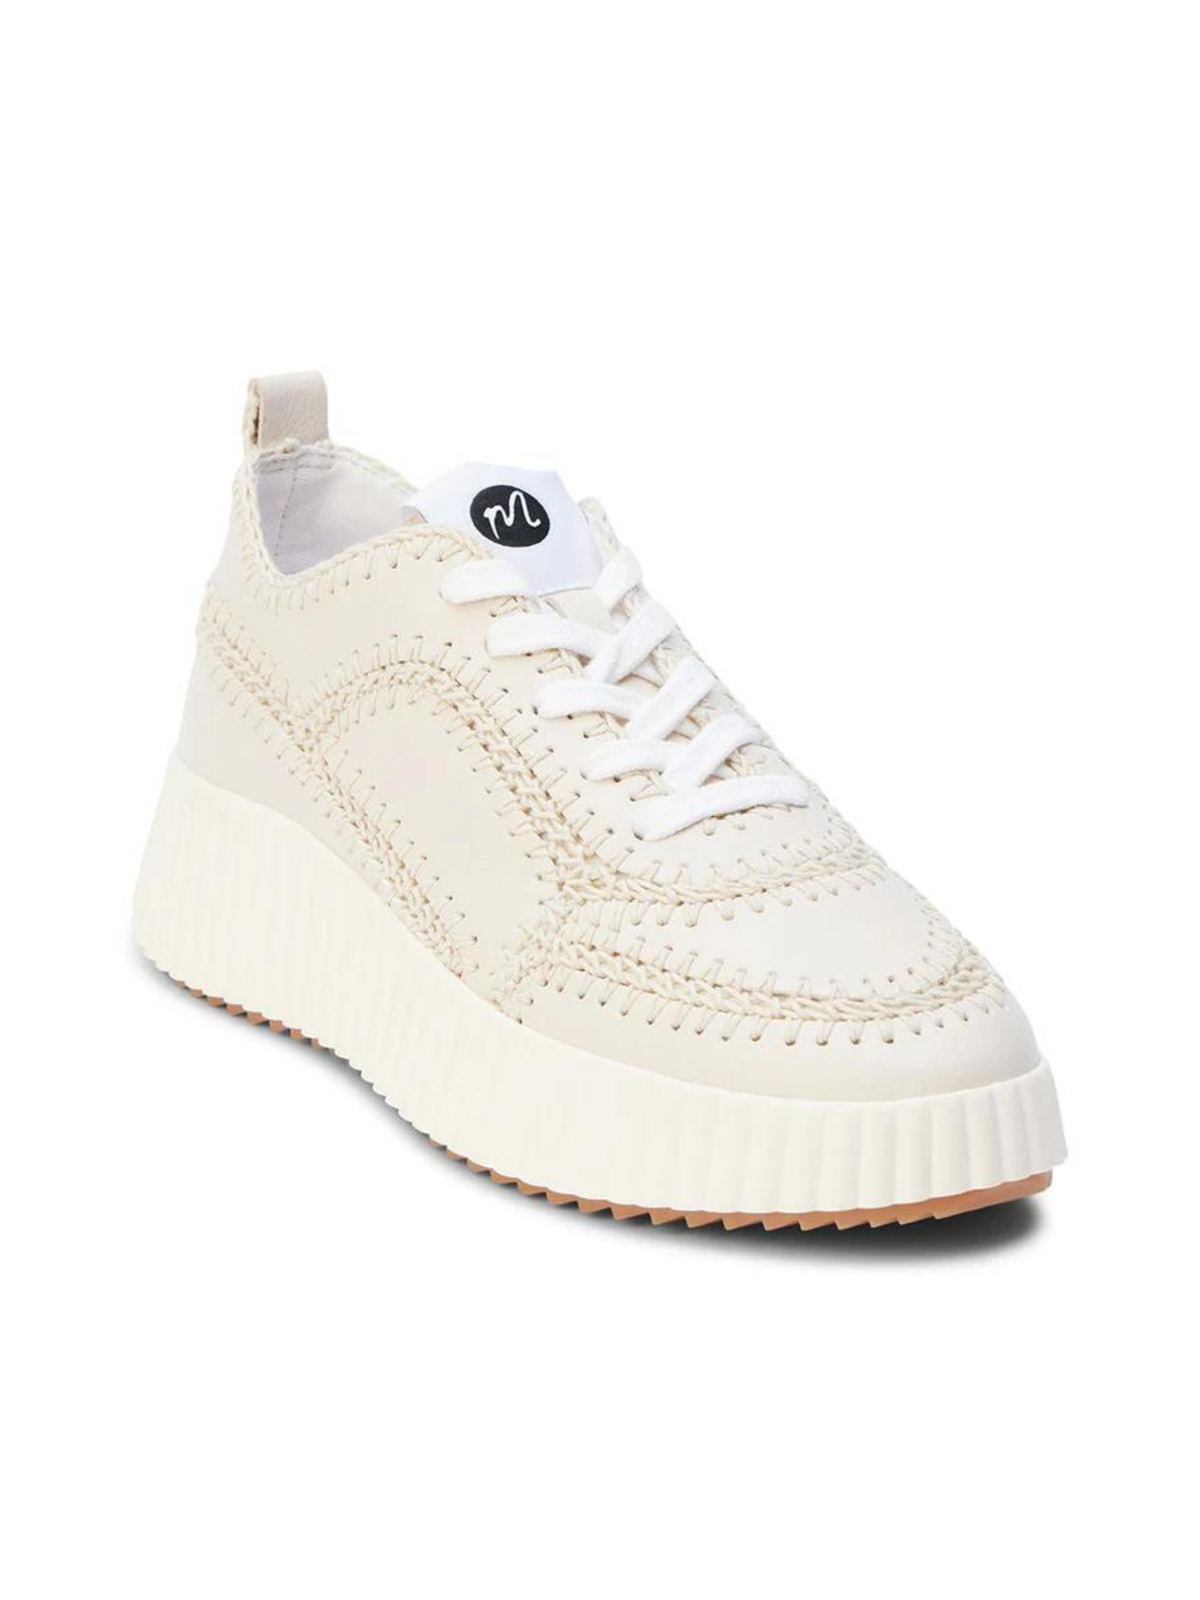 Nelson Sneaker in Natural - Sophie